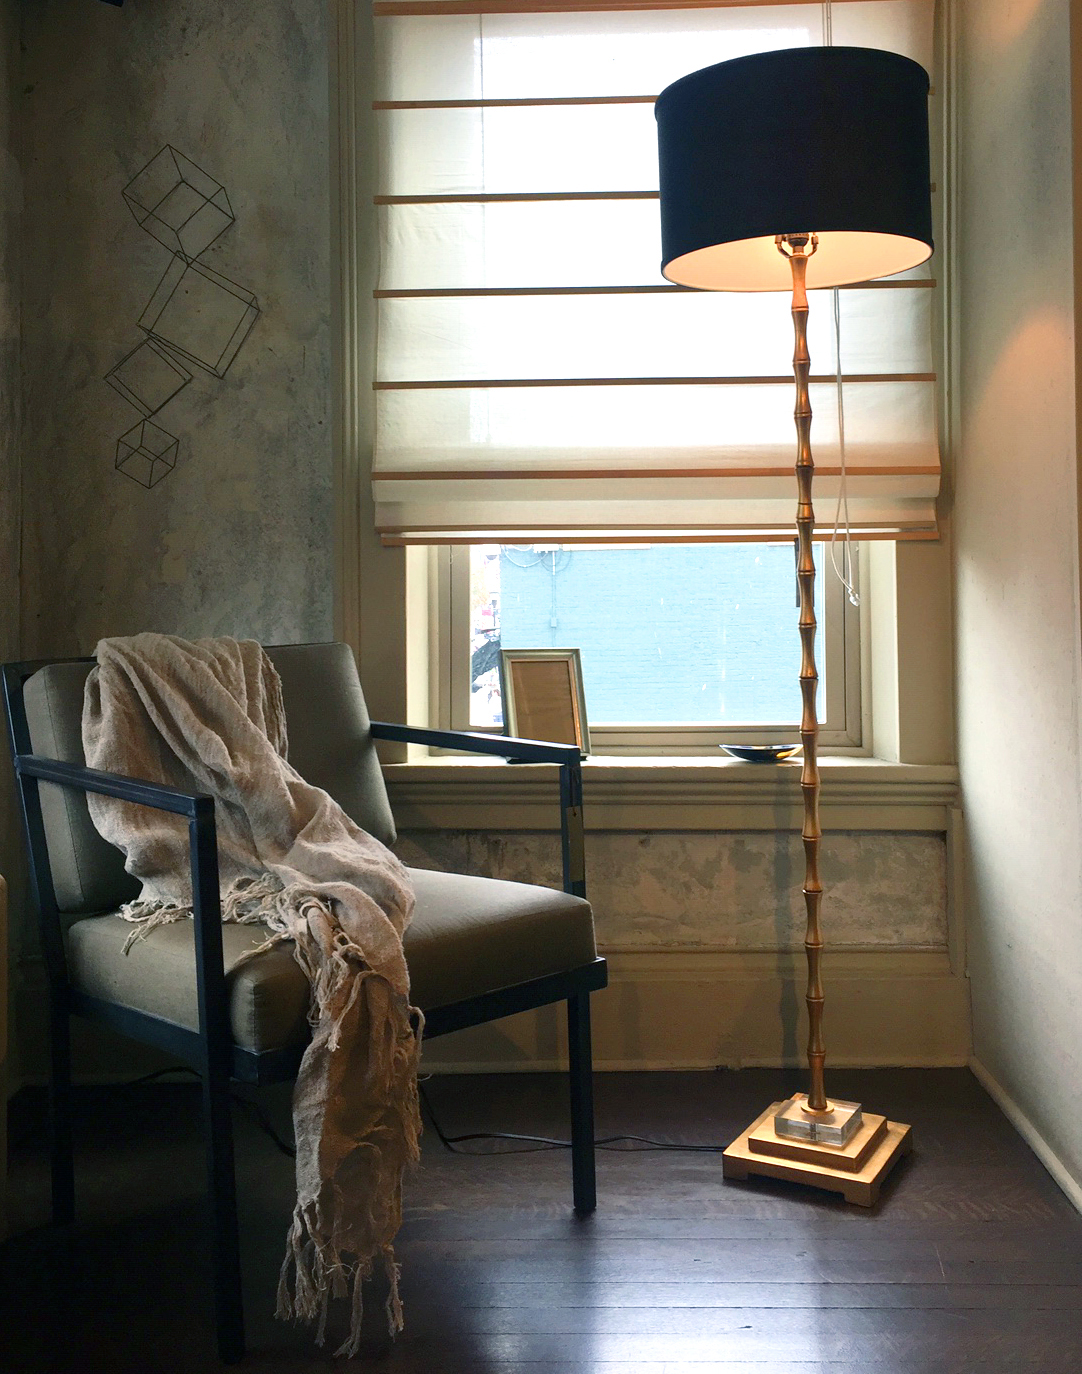   Edgar Floor Lamp  $385   Gold Leaf and Linen 65”H Shade 10”H x 16”Dia   Healy Chair  $1,475 Linen and Steel 28”D x 22.5W x 31”H - 6 weeks Made in Maine   Peasant Throw  $88 Natural Fringe Pre-Washed Linen 50” x 70”   Livorna Frame  $42 Silver 5 x 7